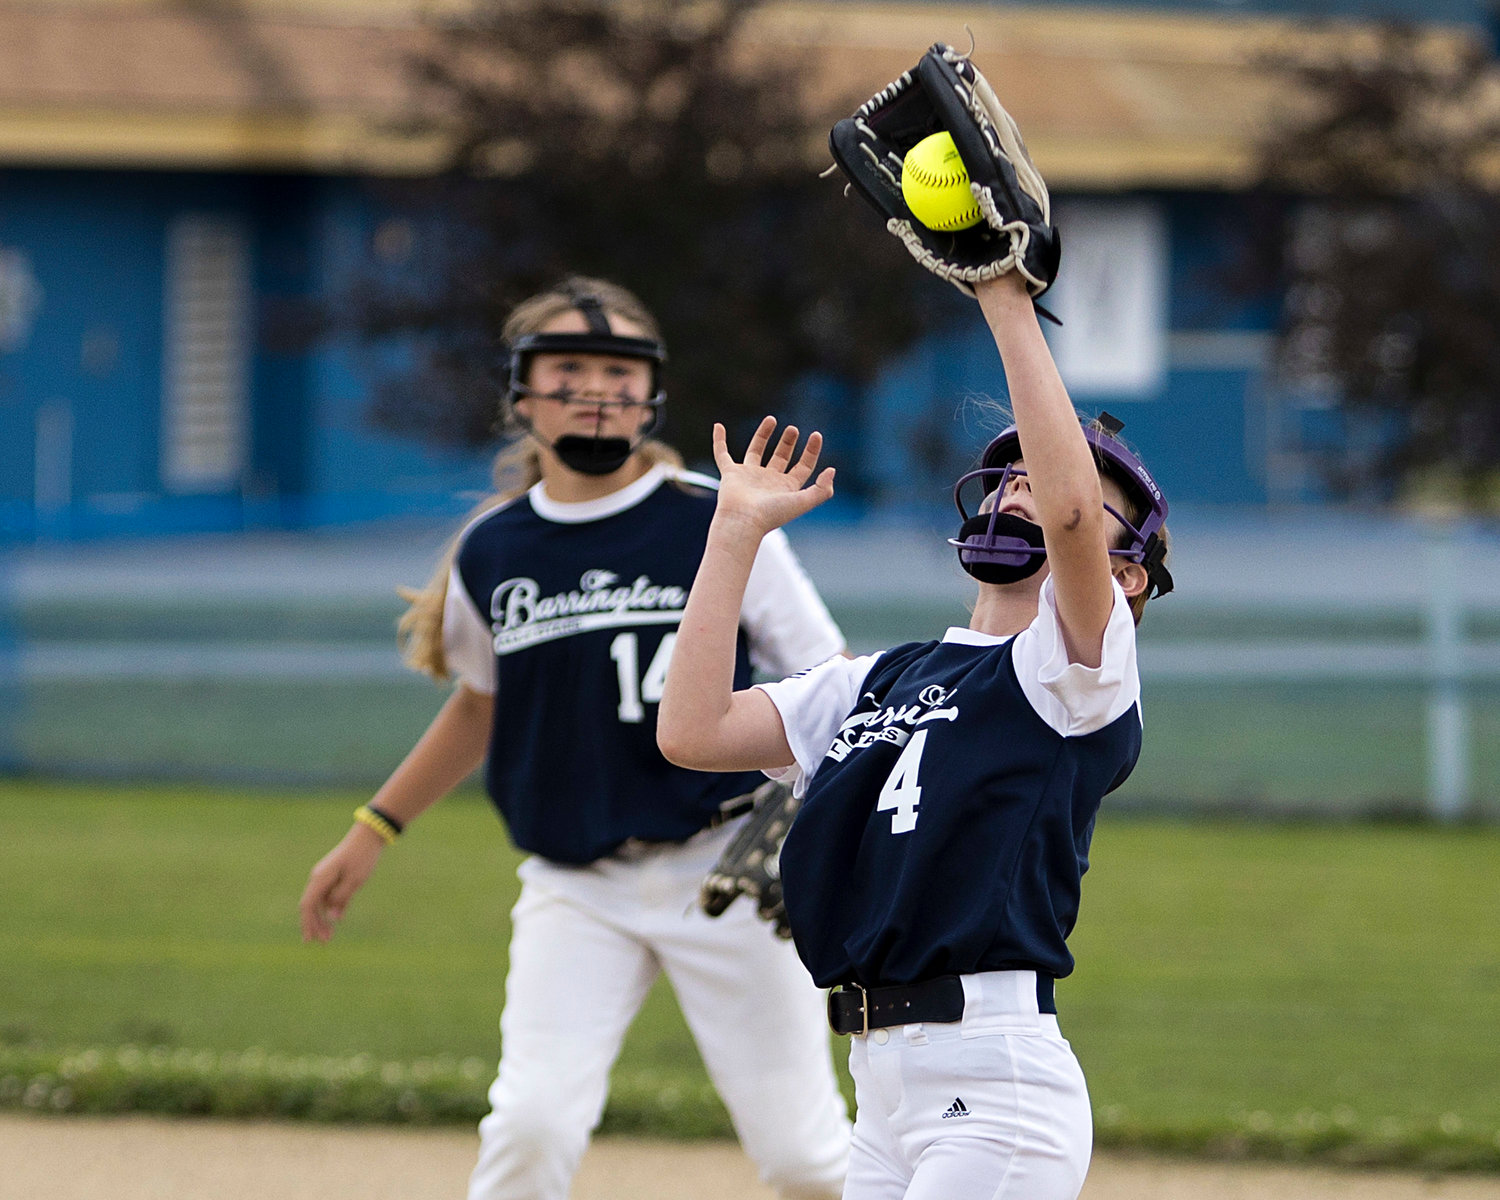 Sky LoVerme gets a glove on a hit in the first inning of Tuesday's playoff game, against Middletown.